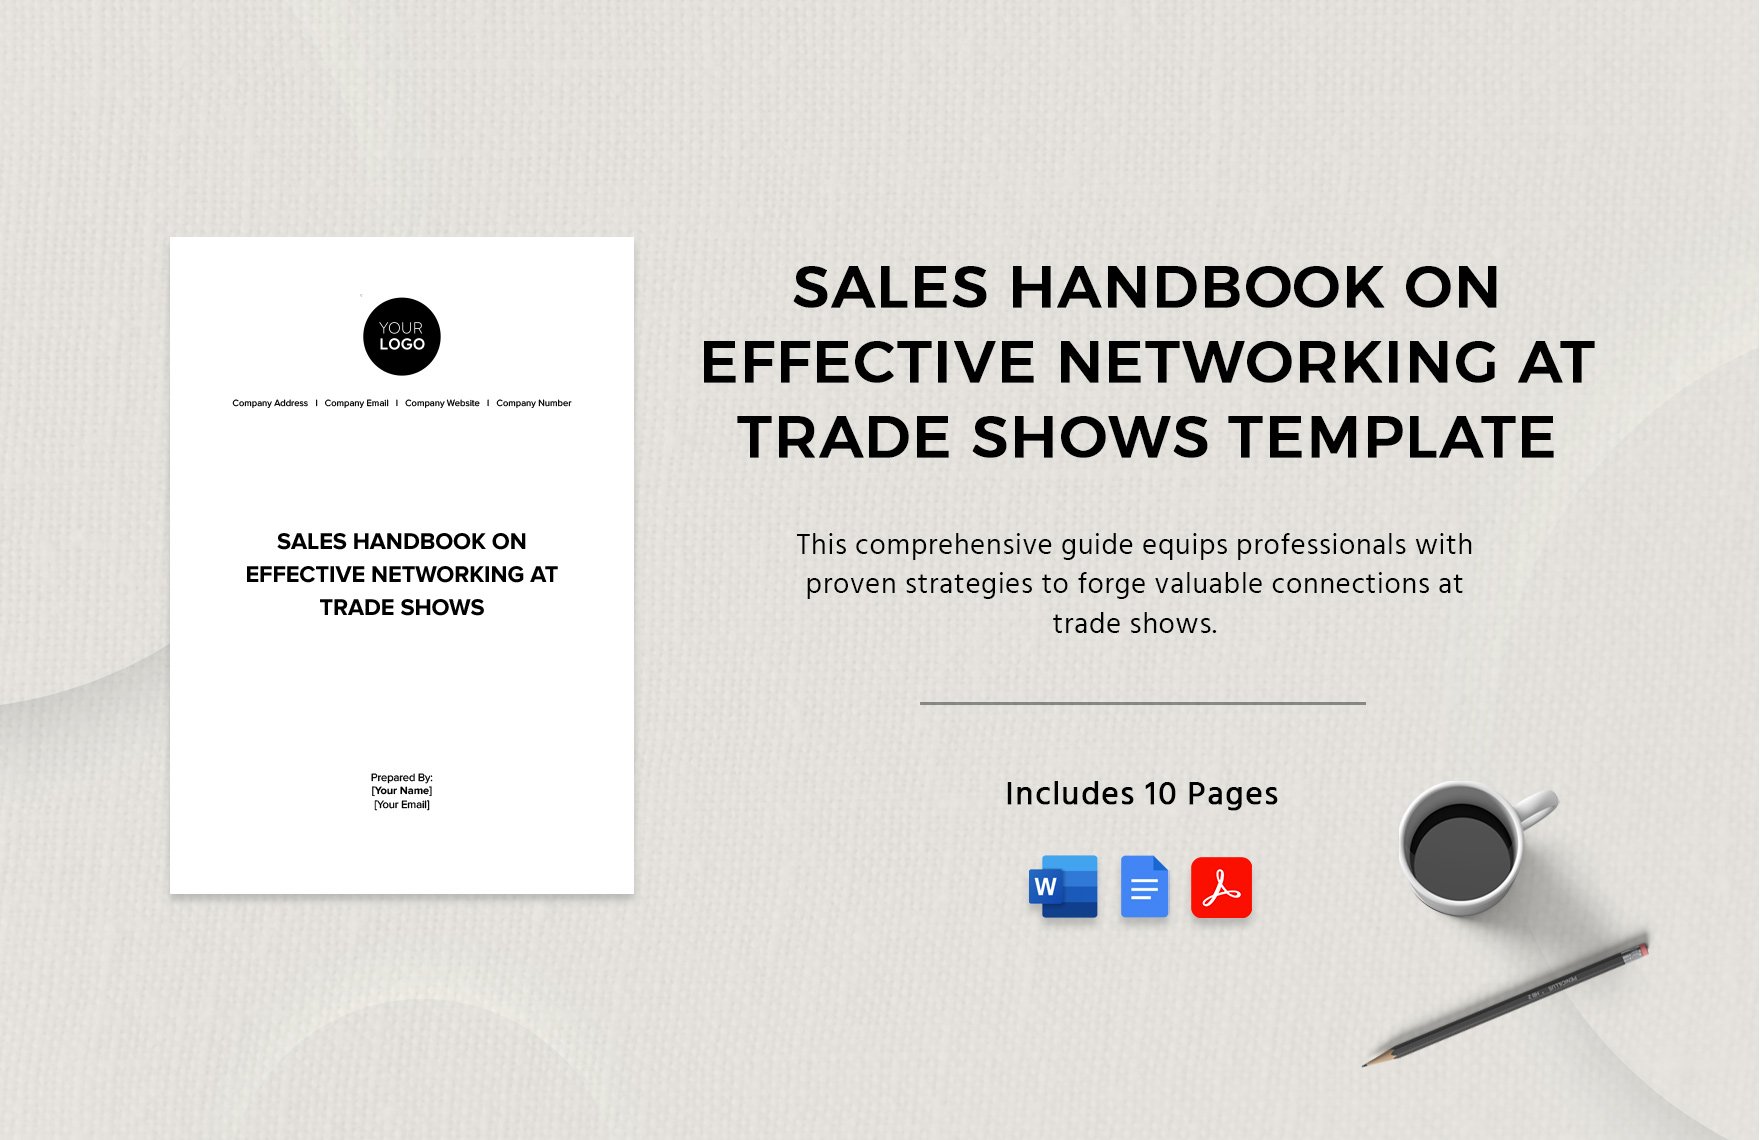  Sales Handbook on Effective Networking at Trade Shows Template